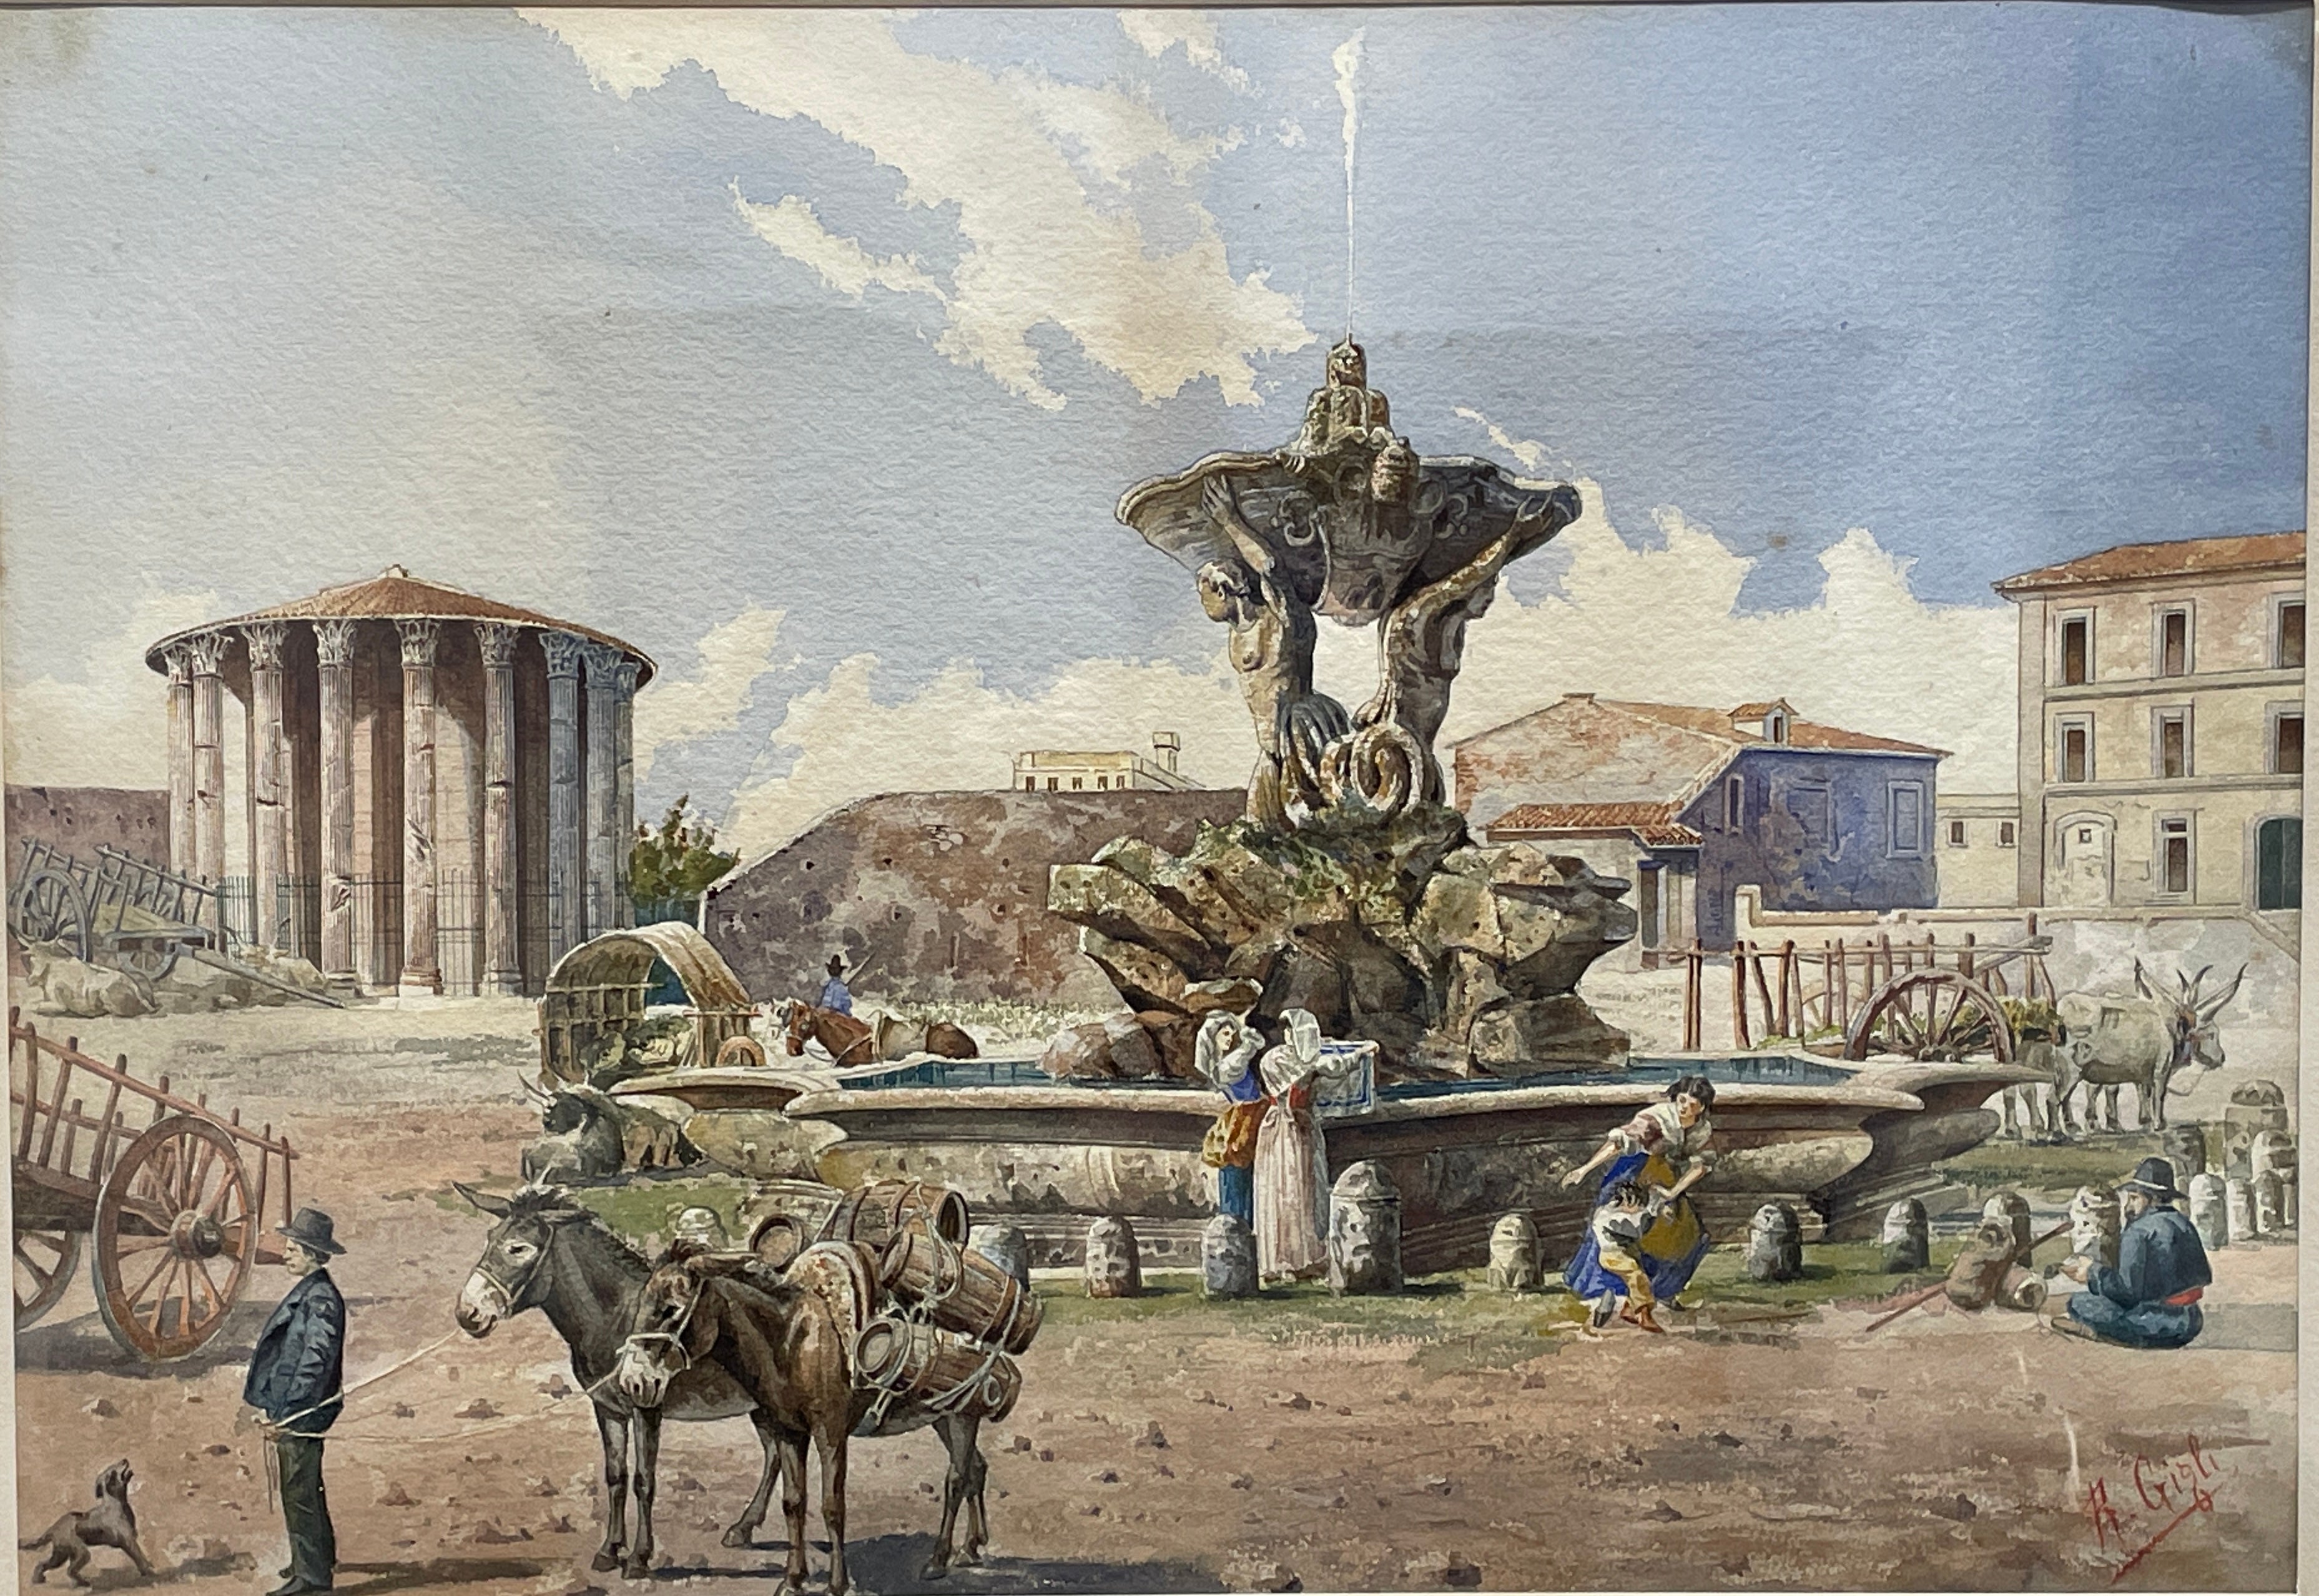 Roberto Gigli (Italian, 1846-1922), “View of the Hercules Victor Temple at the Forum Boarium”, watercolor, signed lower right. The Forum Boarium was the ancient cattle market of Rome. Framed behind glass.